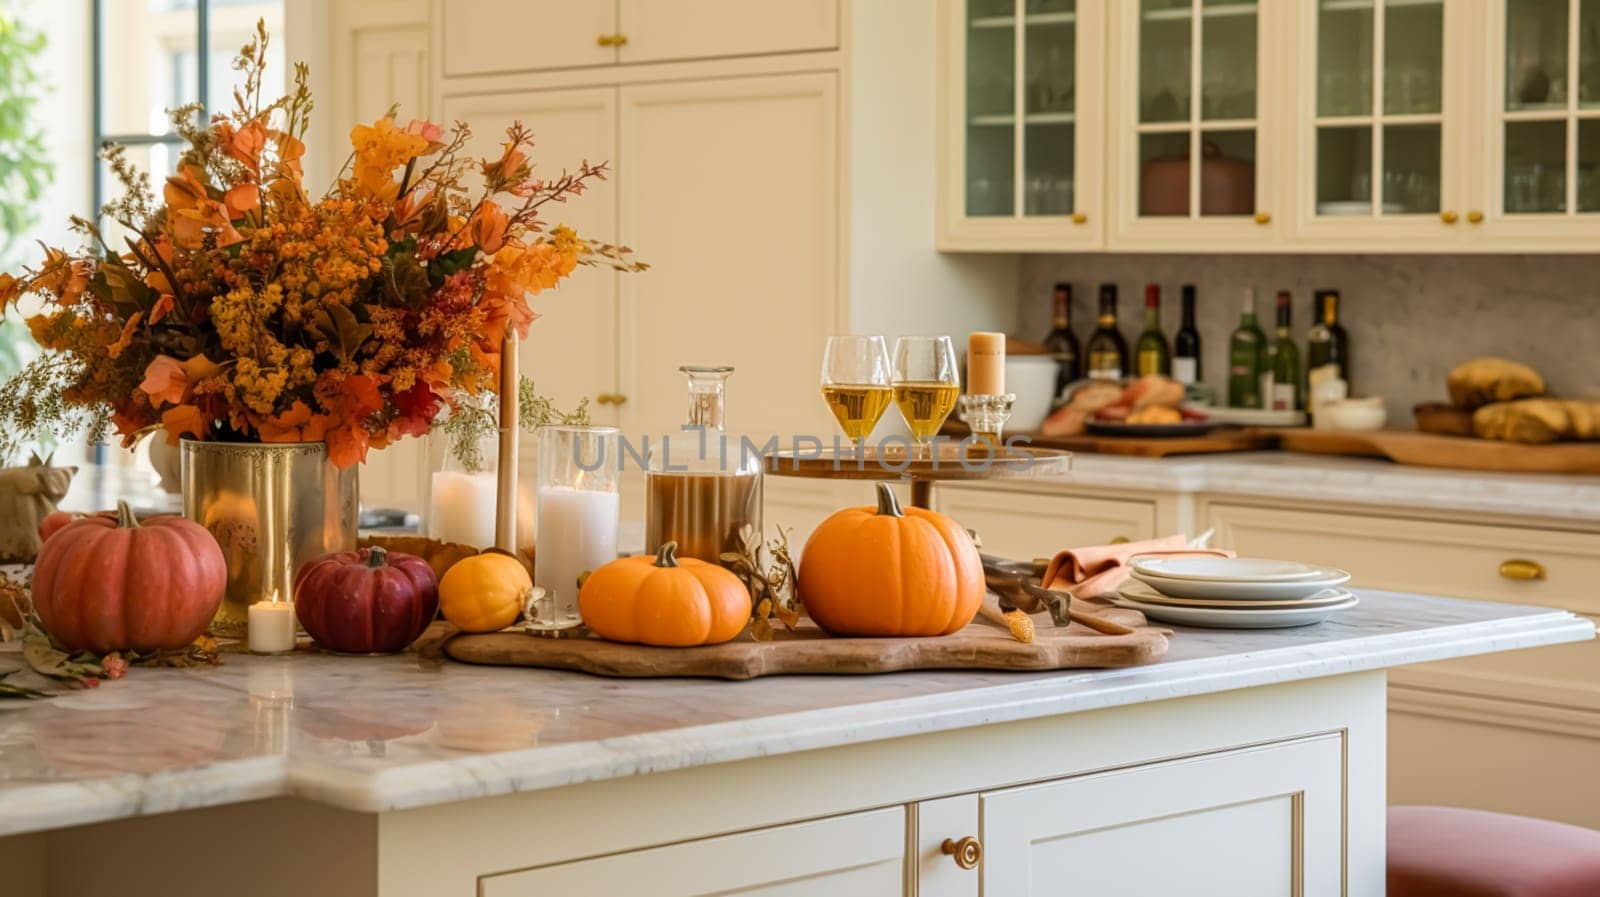 Autumnal kitchen decor, interior design and house decoration, classic English kitchen decorated for autumn season in a country house, elegant cottage style by Anneleven